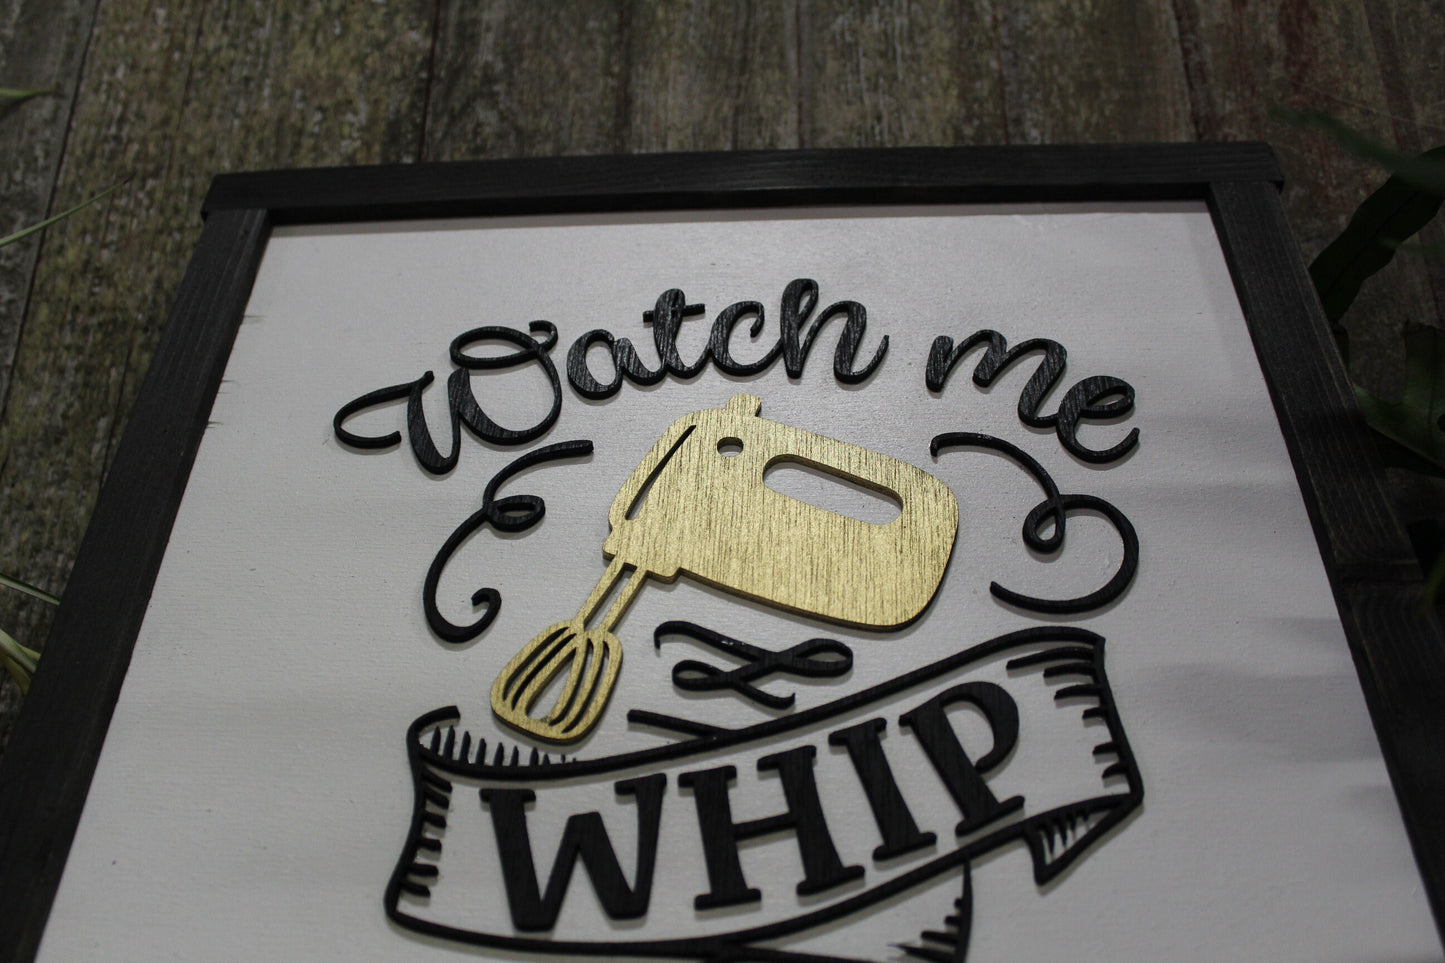 Watch Me Whip Kitchen Cooking Baking Mixer Fun Wall Decor Sign Primitive County Rustic Gift Warm Funny Handmade Dishes Cakery